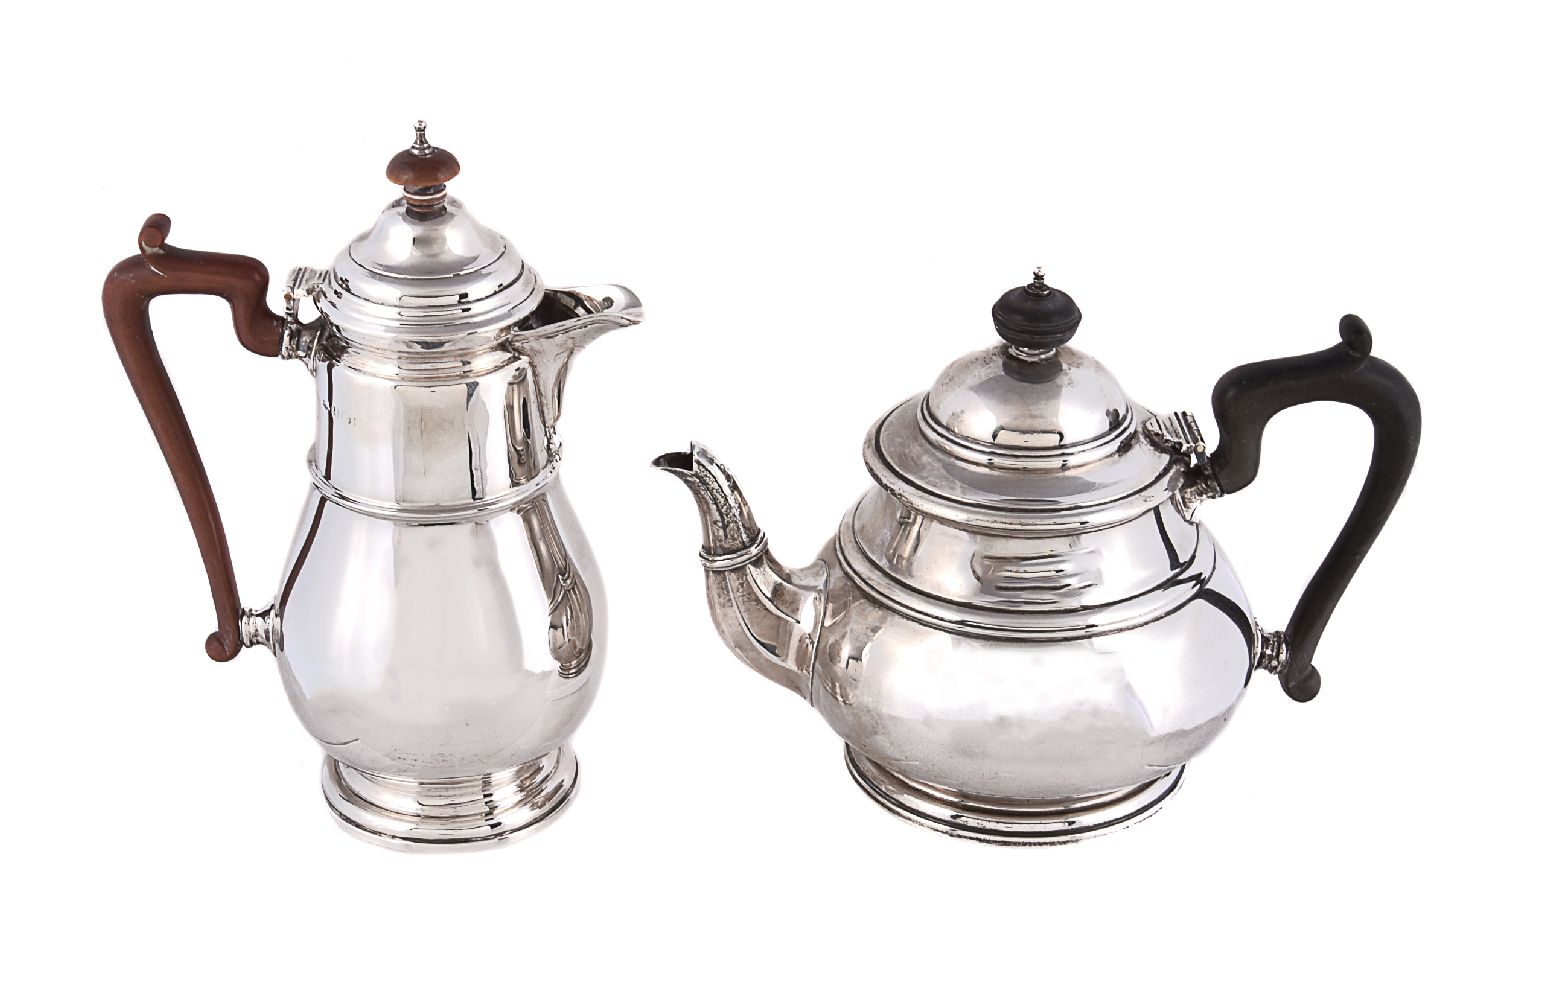 A silver baluster tea pot and coffee jug by Mappin & Webb